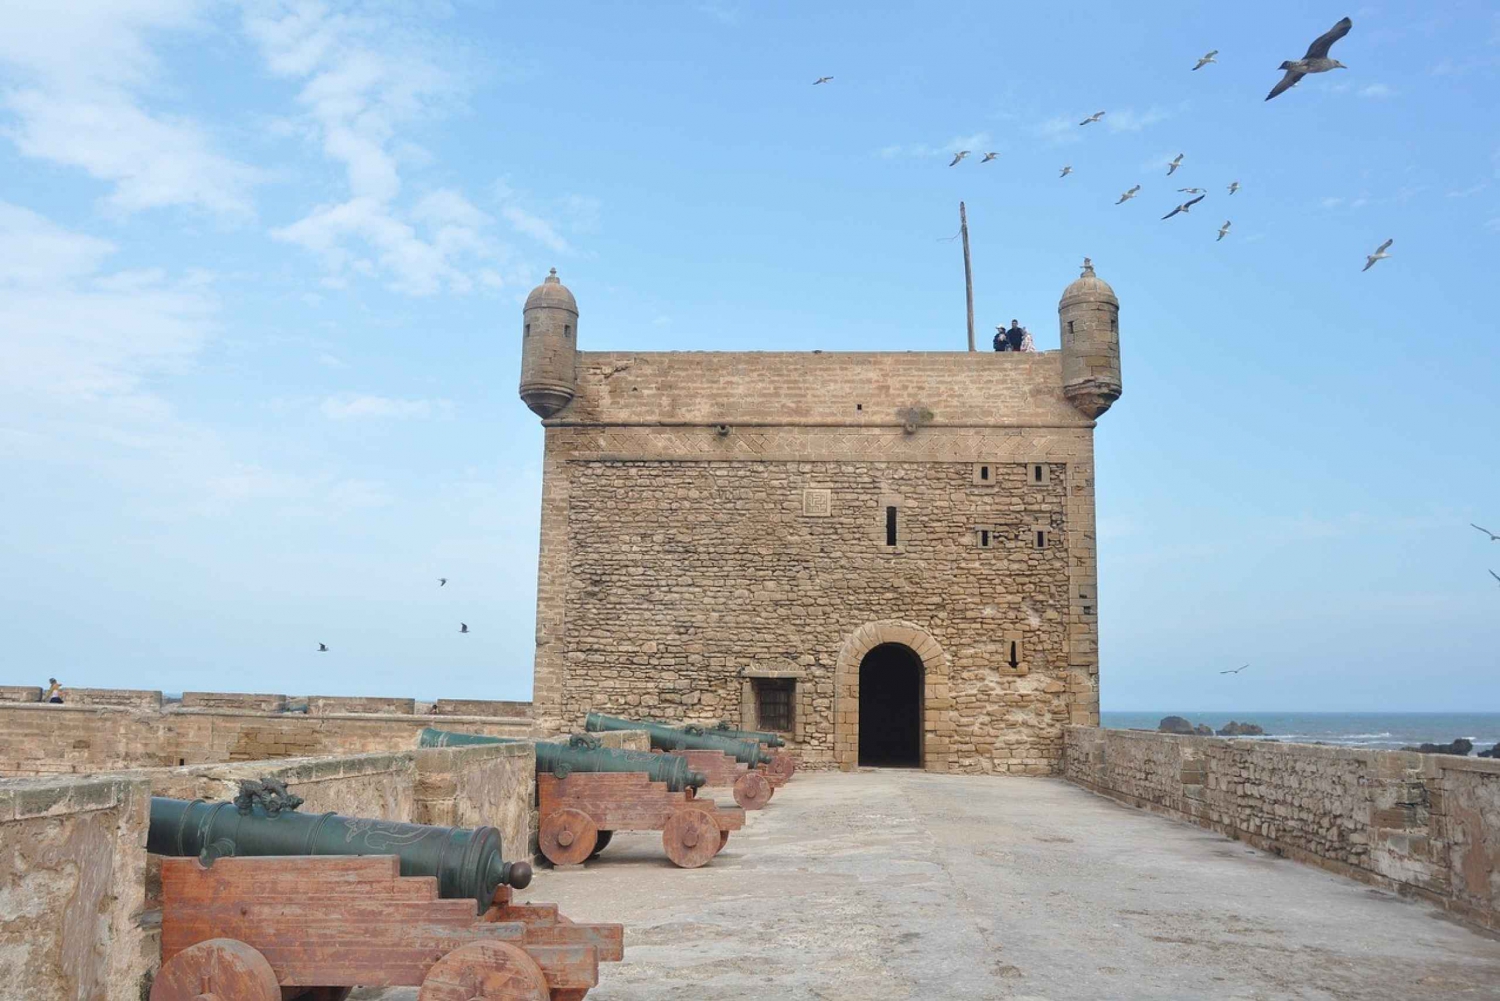 One Day Trip from Marrakech To Essaouira